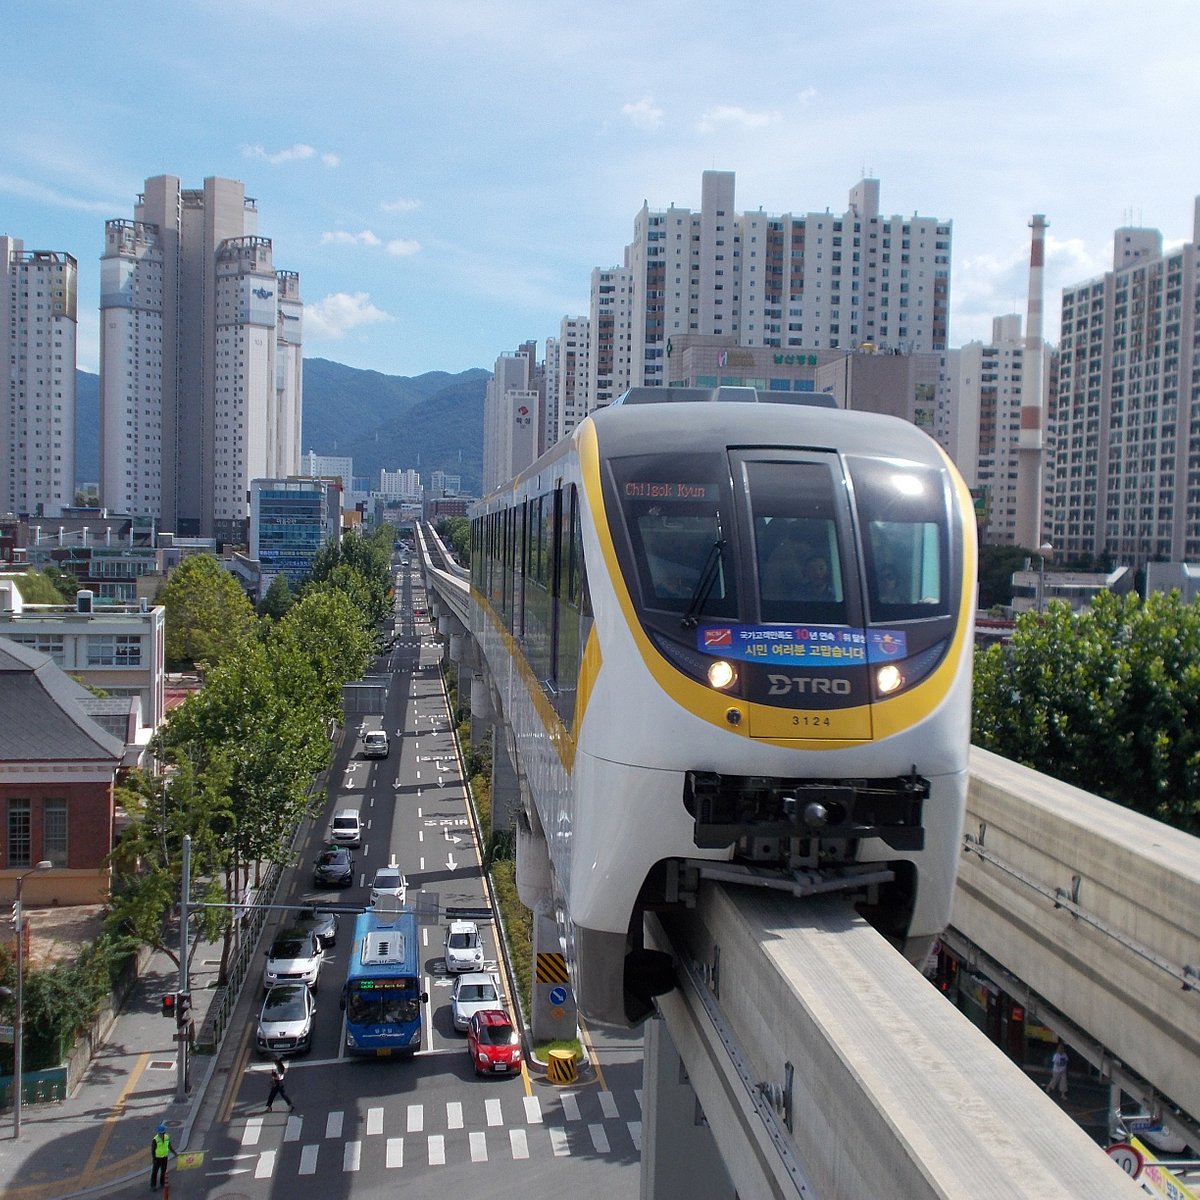 The Daegu Metro showing one of the smart monorail trains on its elevated track.